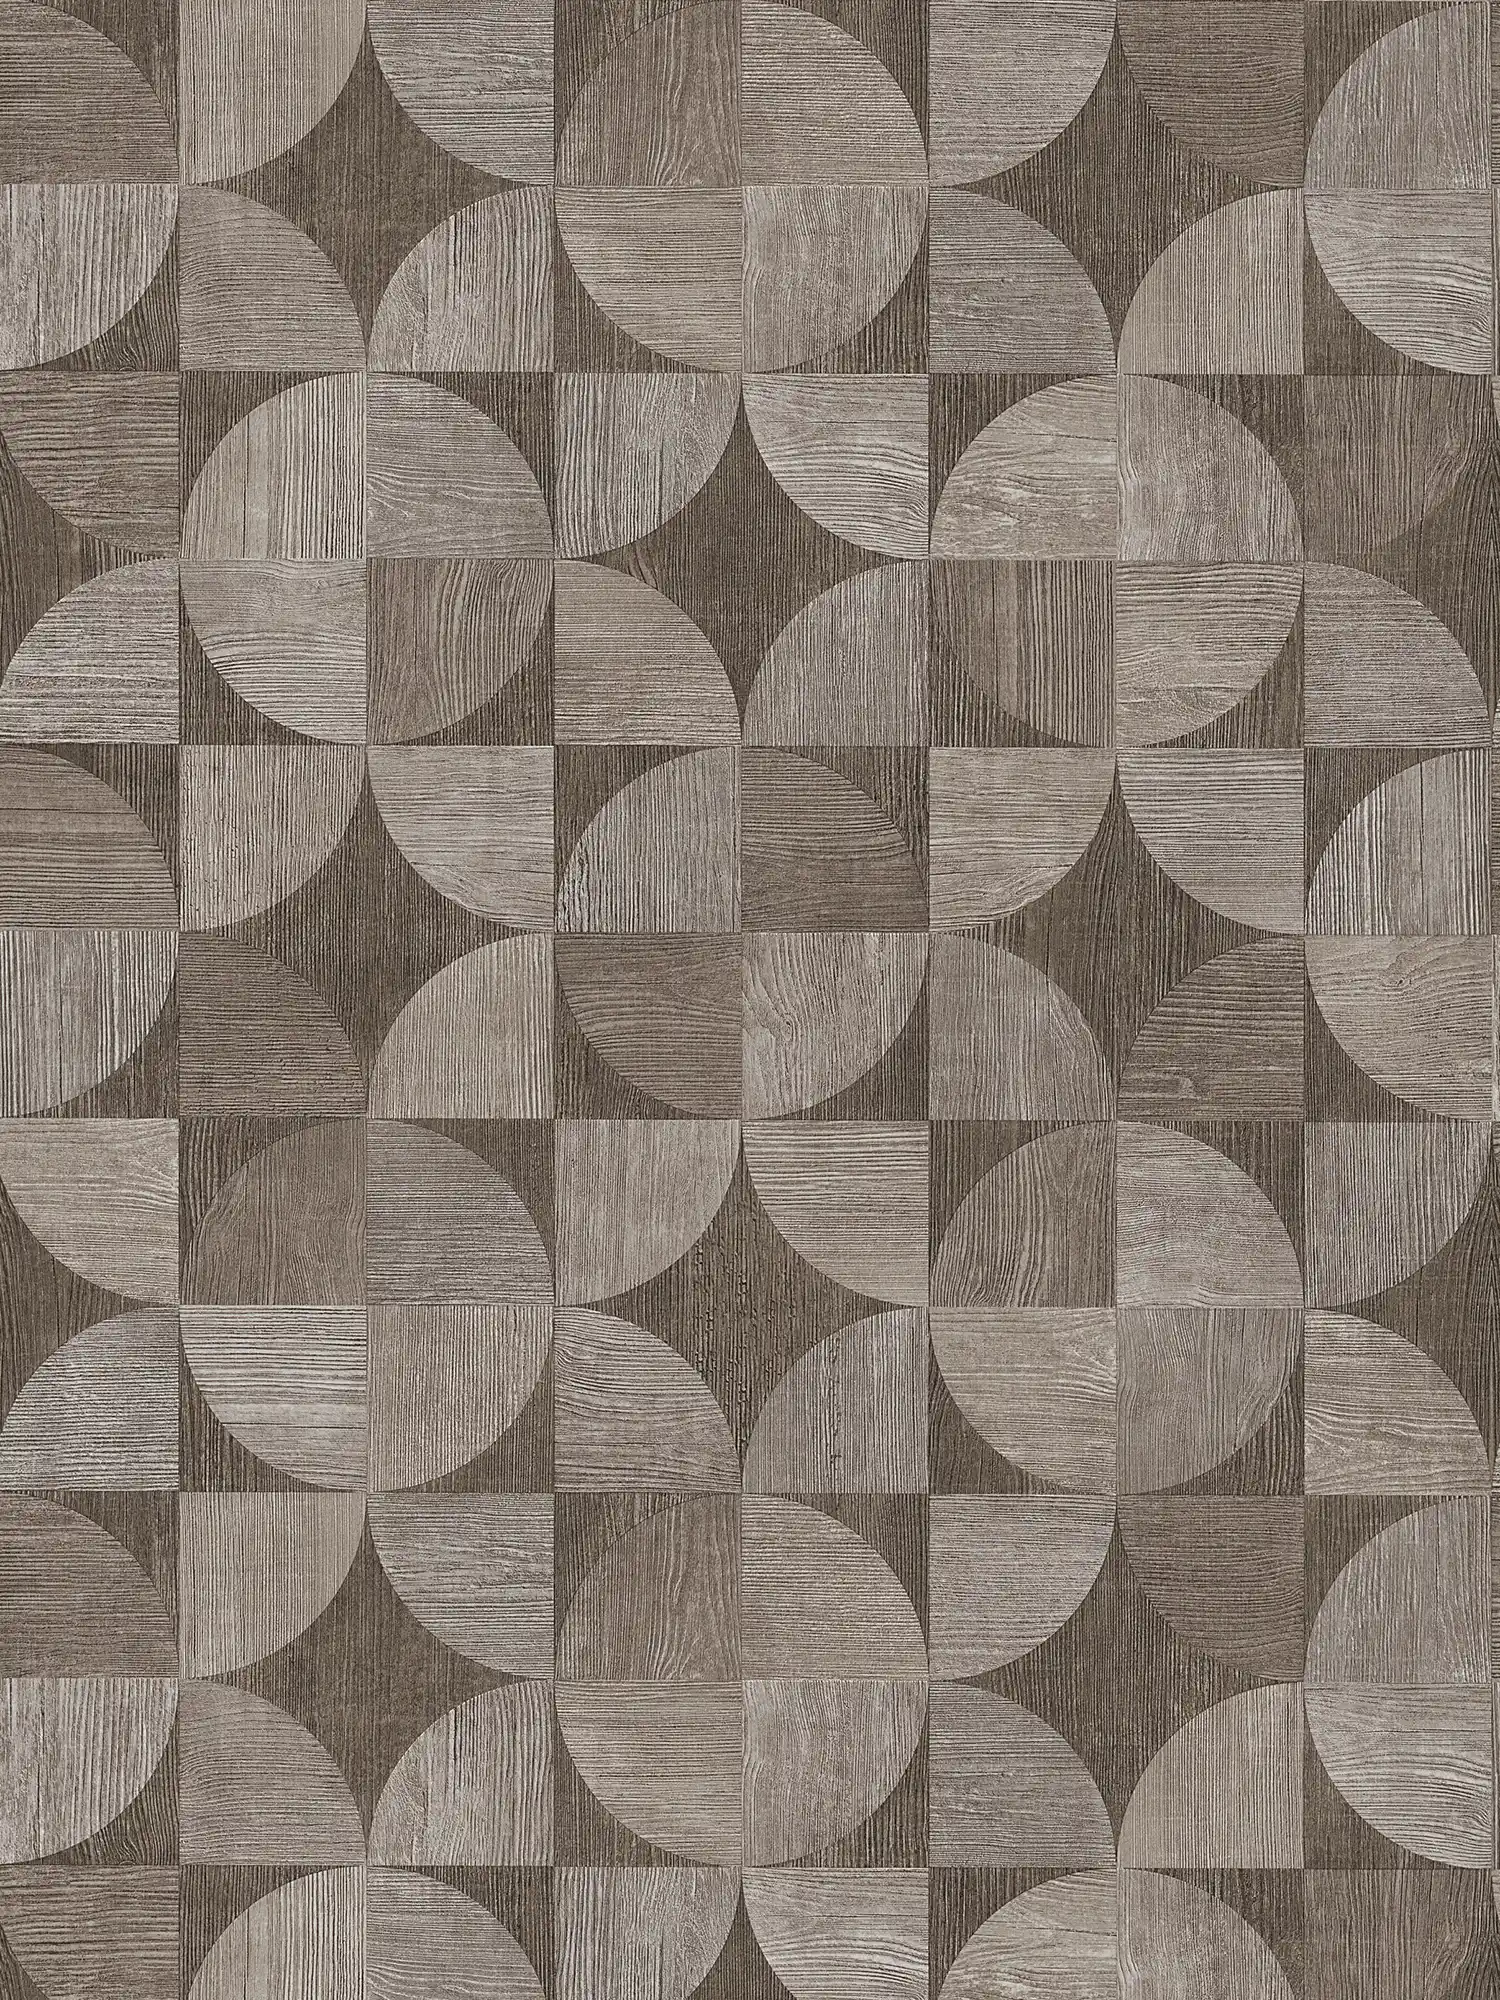 Wallpaper with graphic pattern in wood look - grey, brown
